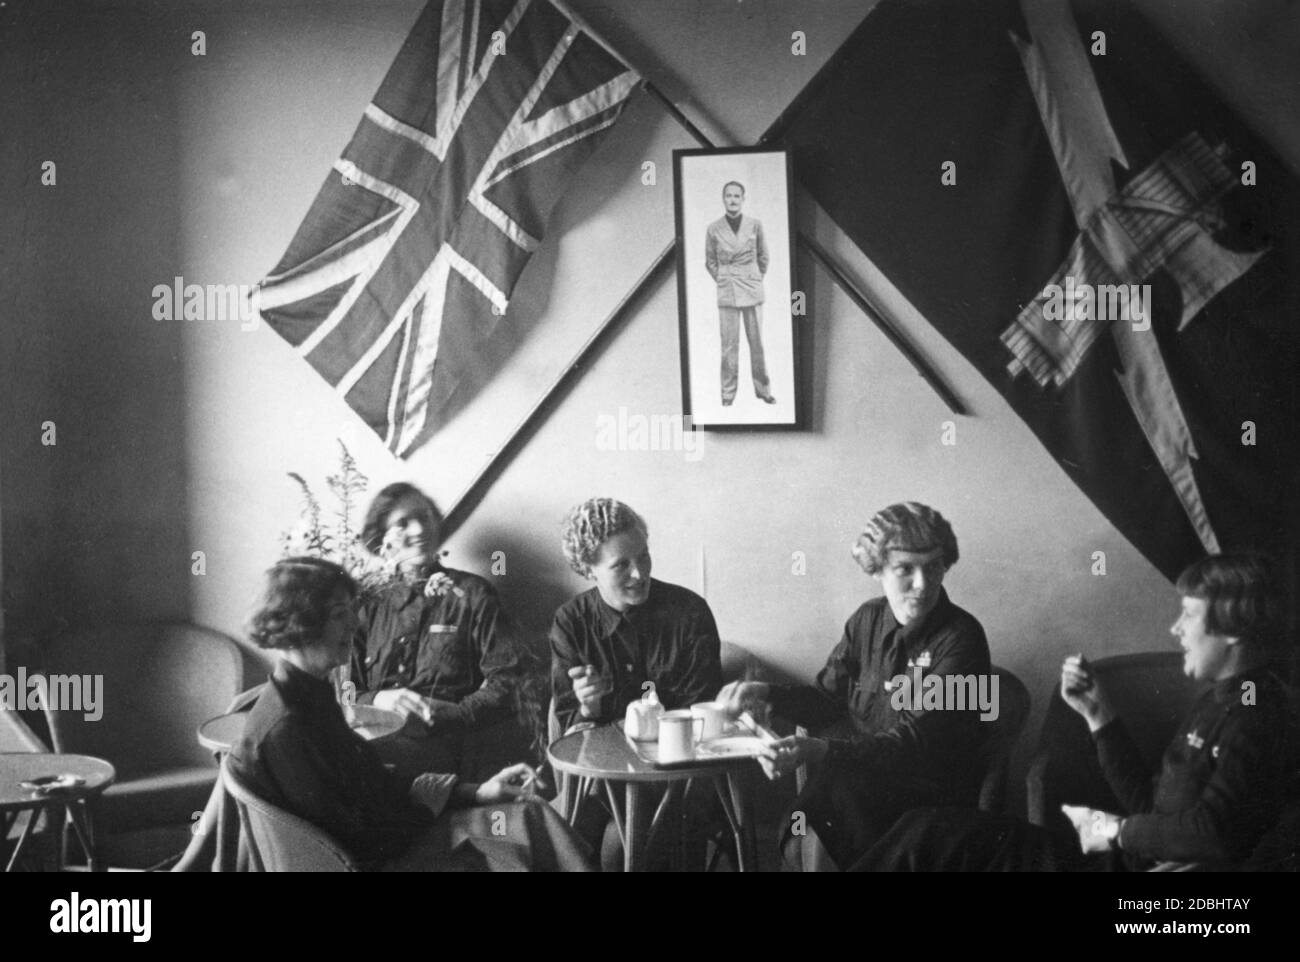 'Female members of the ''British Union of Fascists'' (BUF) at their headquarters in London. In the background on the wall hangs a picture of Oswald Mosley. (undated photo)' Stock Photo